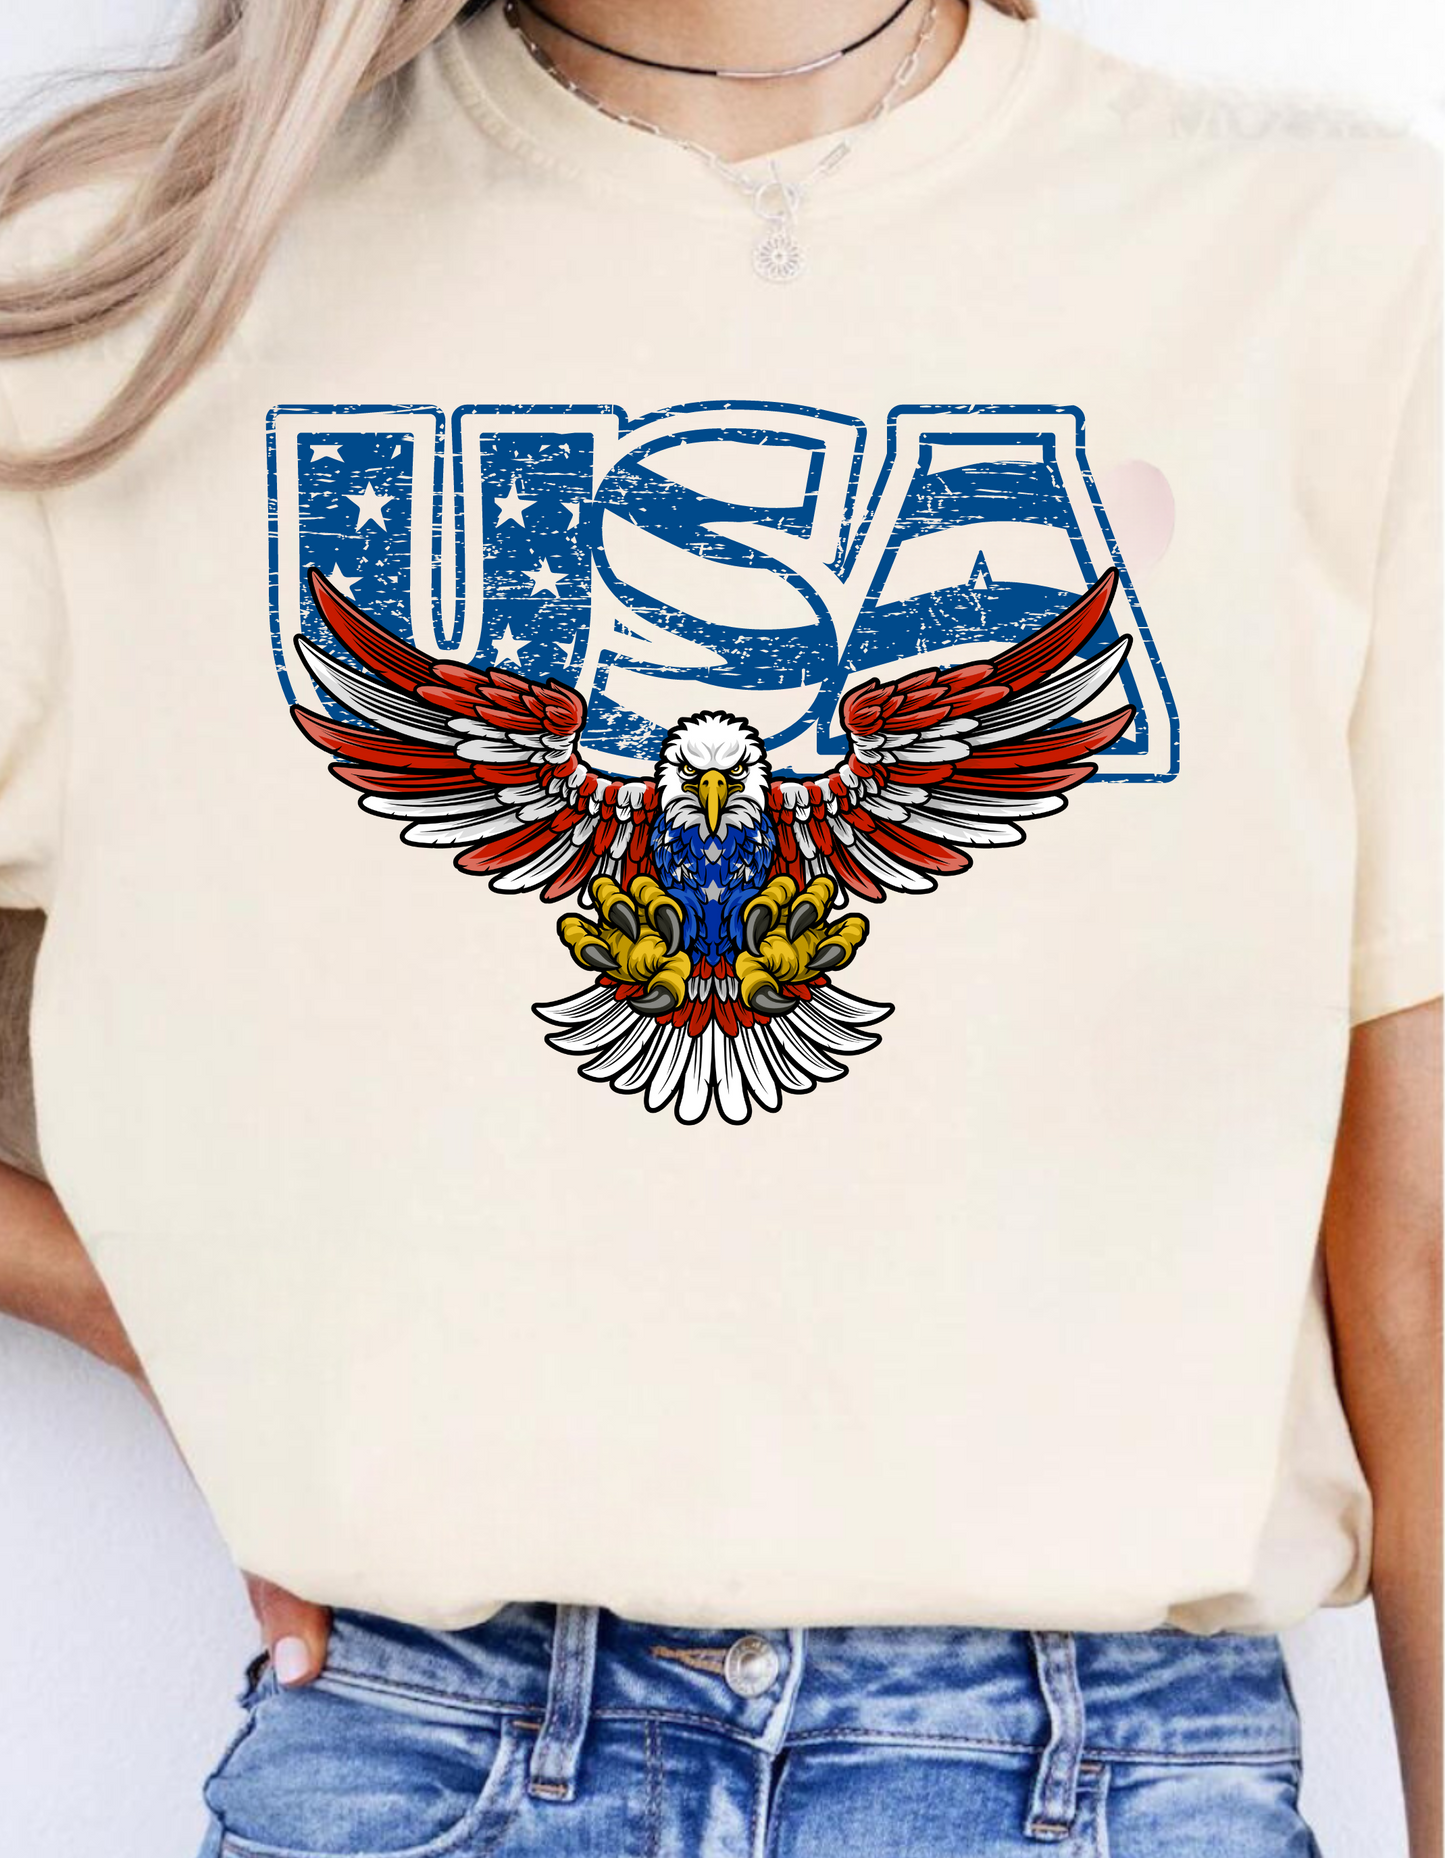 USA Themed Comfort Colors 1717 Garment-Dyed T-Shirt - 100% Ring-Spun Cotton, Relaxed Fit